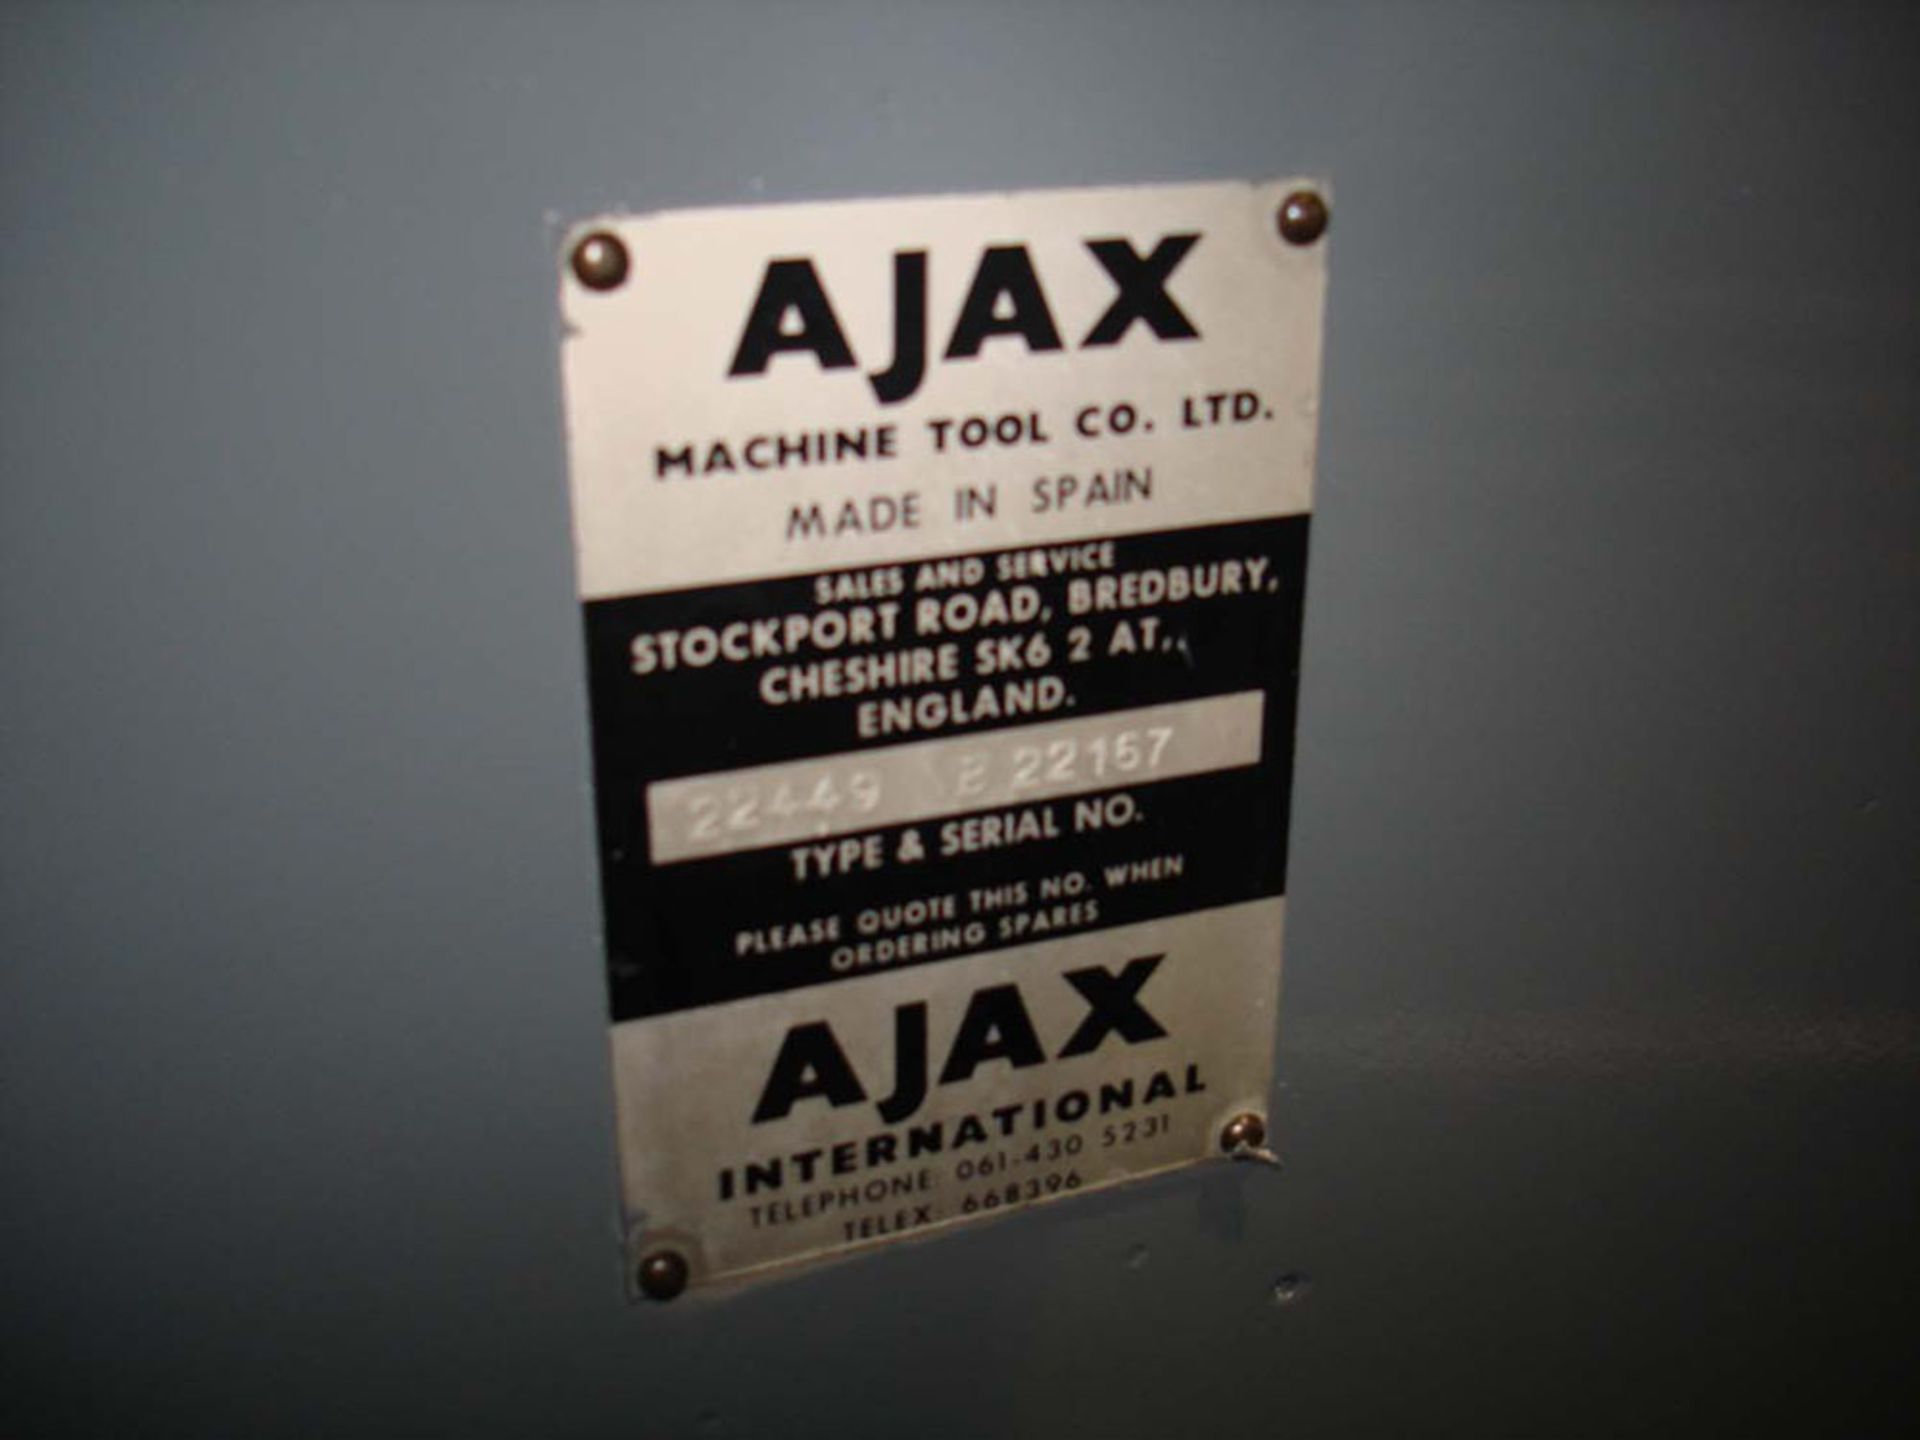 Ajax Model UP Universal Milling Machine. Table 1100 x 240mm. Long Traverse 750mm. - Image 6 of 6